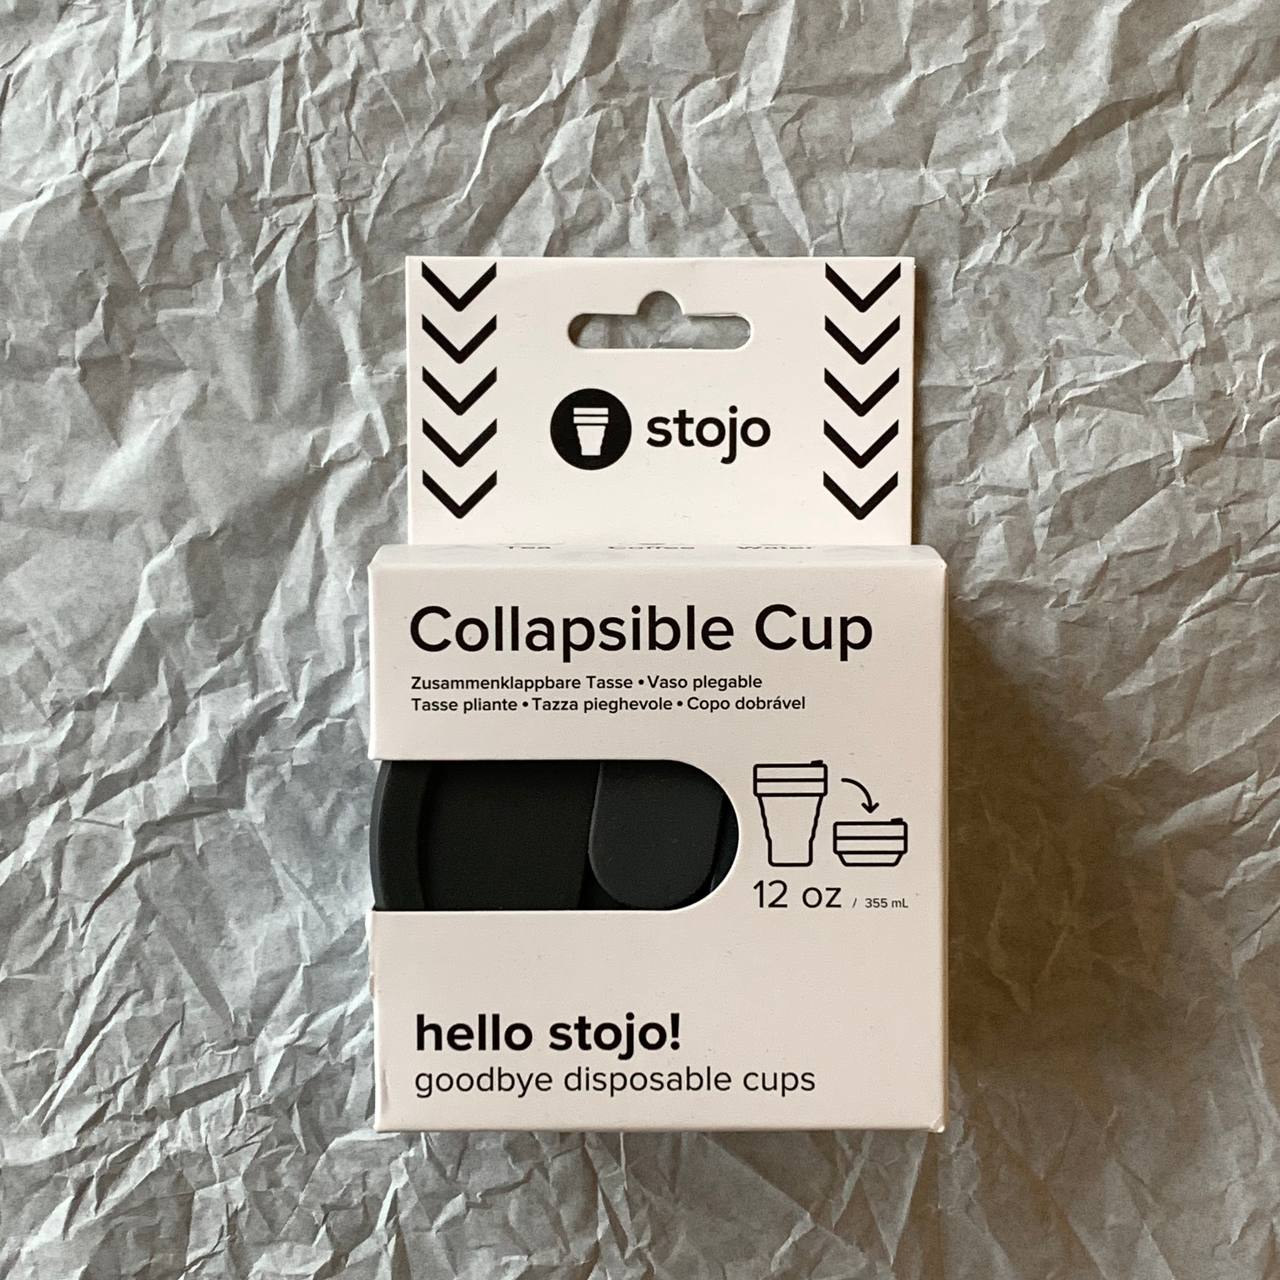 Collapsible cup | Stojo